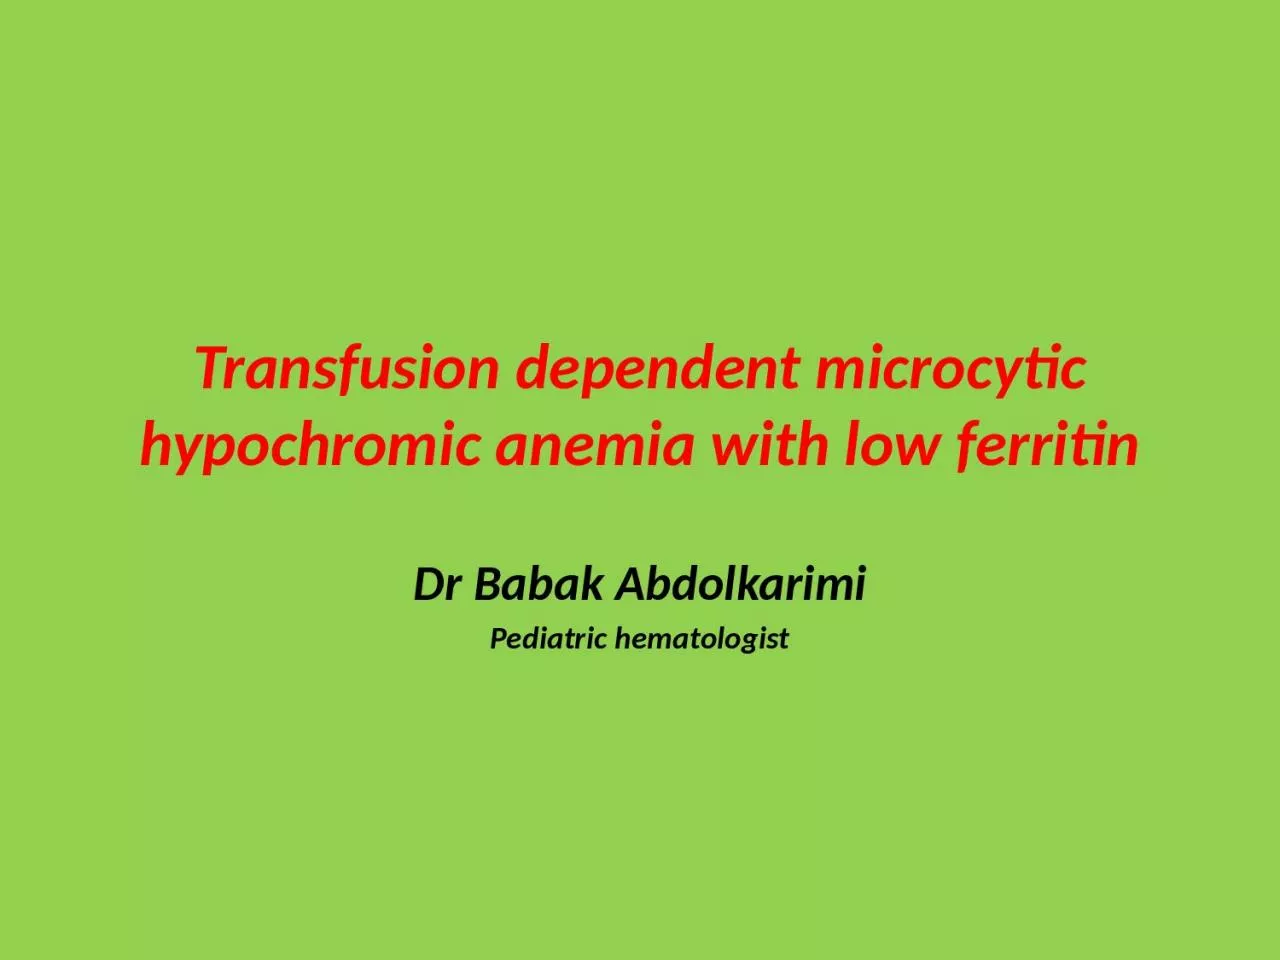 Transfusion dependent microcytic hypochromic anemia with low ferritin